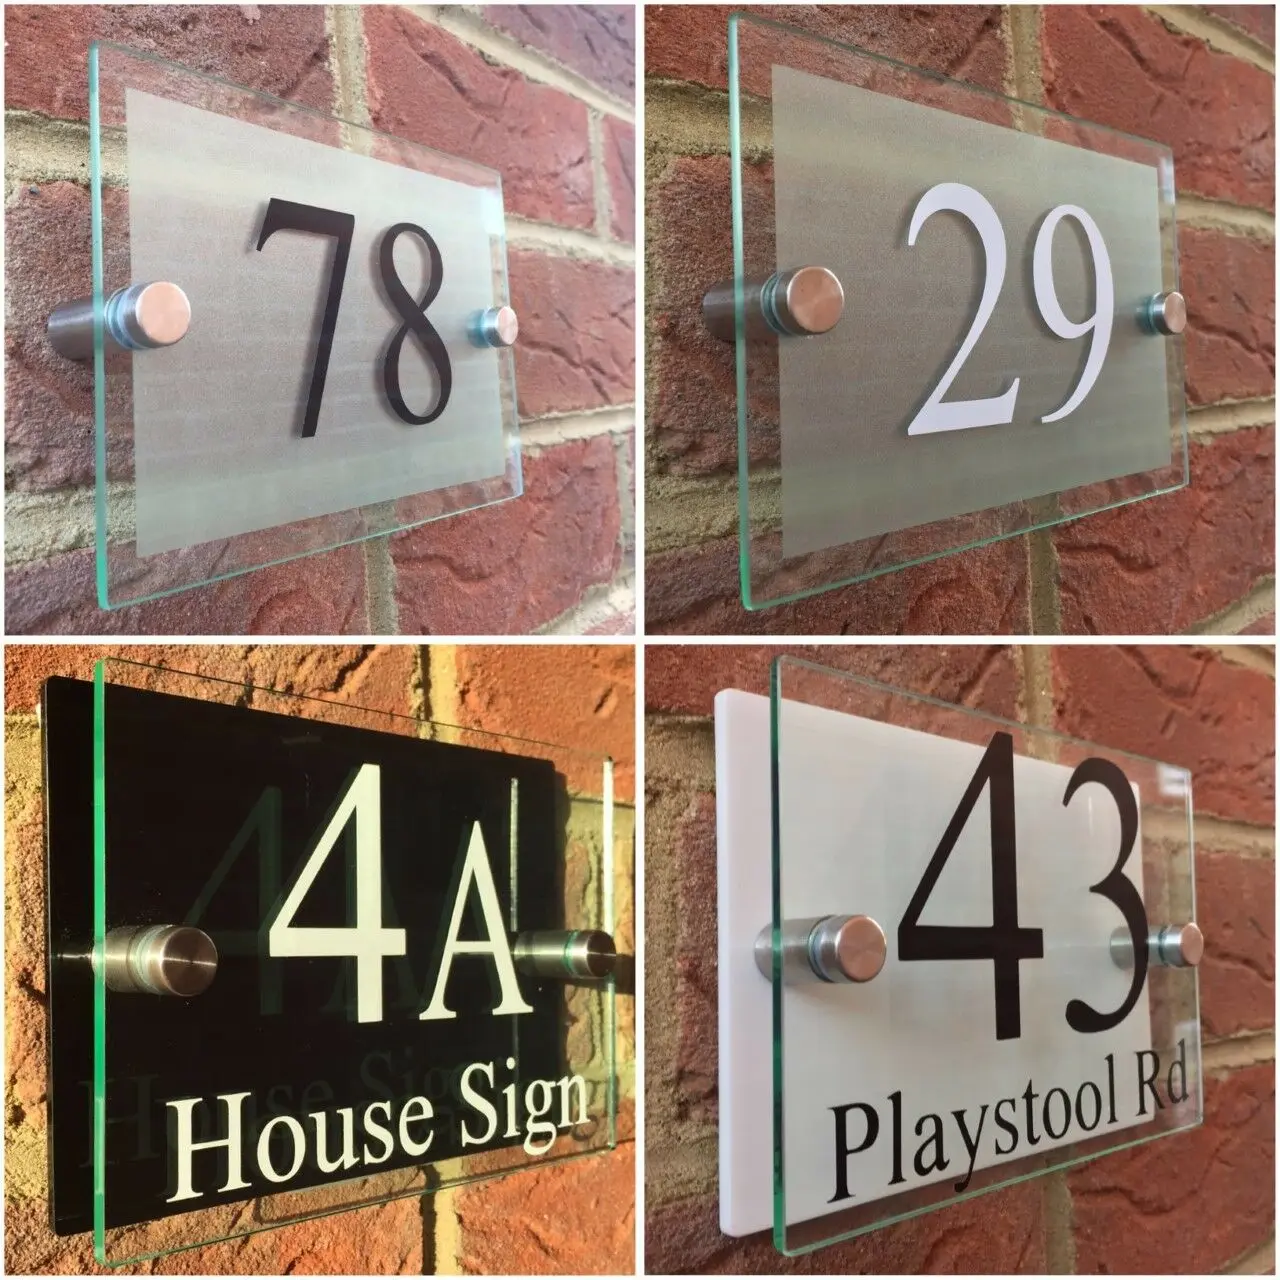 MODERN HOUSE SIGN PLAQUE DOOR NUMBER STREET GLASS EFFECT ACRYLIC NAME 